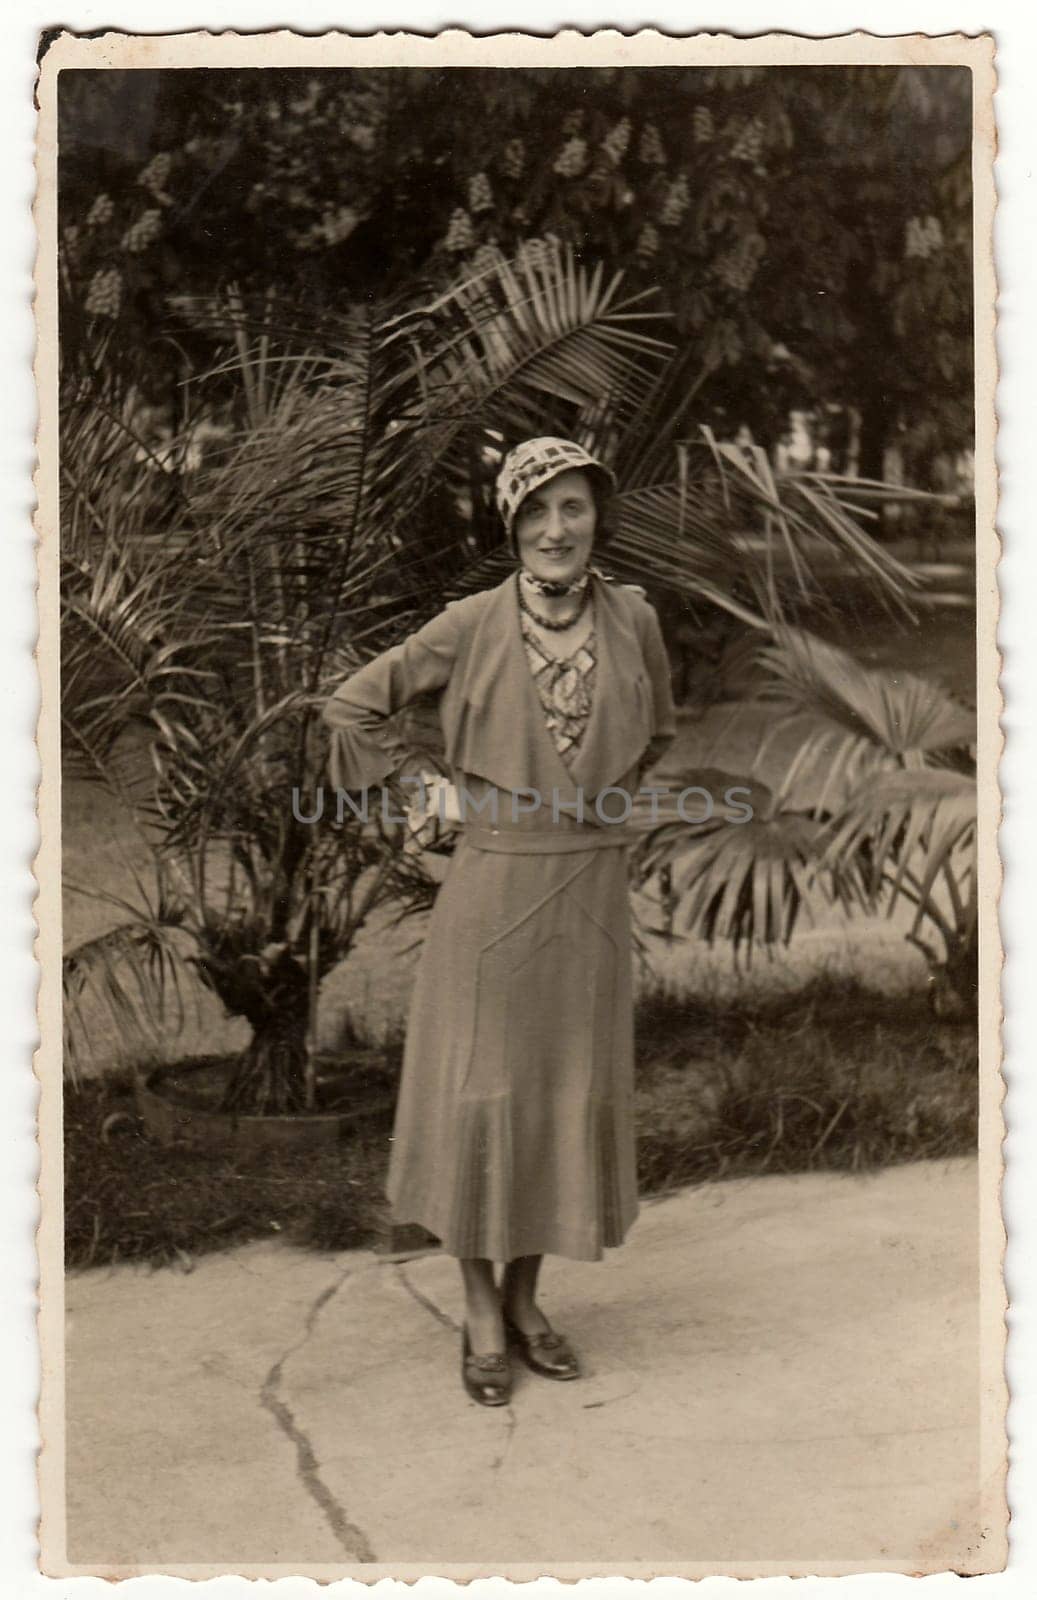 TRENCIANSKE TEPLICE, THE CZECHOSLOVAK REPUBLIC - CIRCA 1930s: Vintage photo shows an elegant woman at the spa resort. Black & white antique photography.